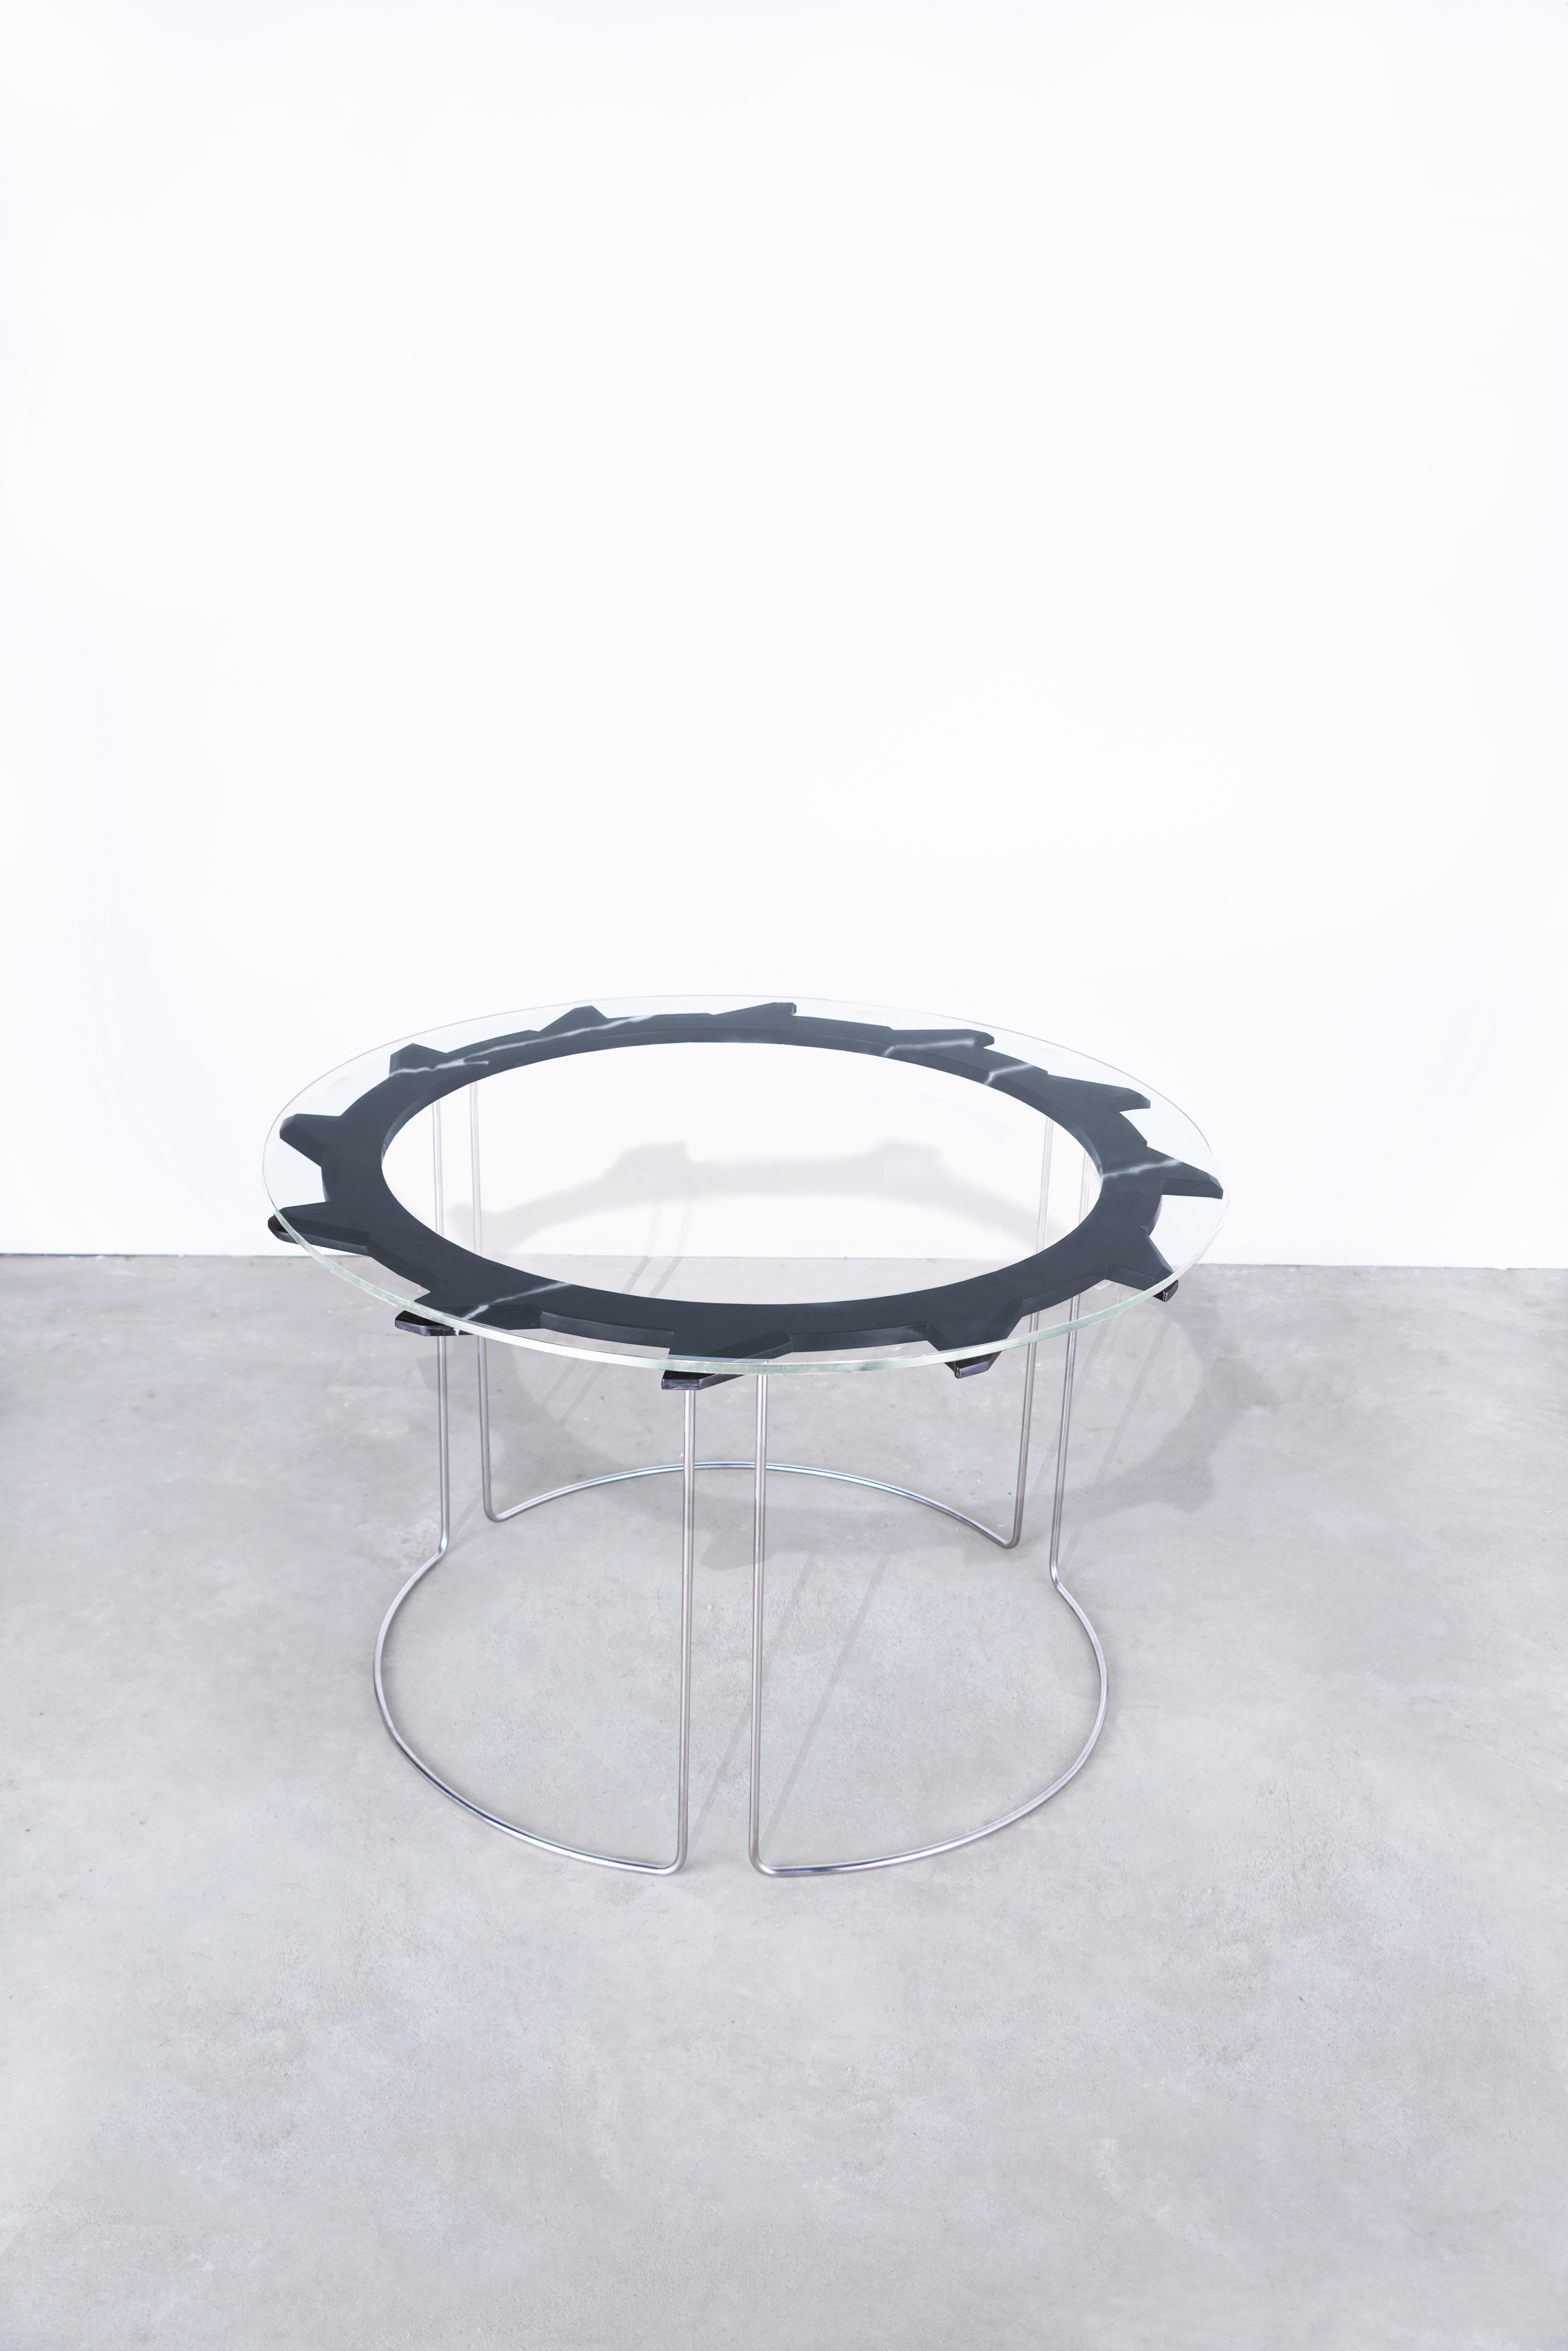 DESCRIPTION
Water jet cut, hand-beveled + hand-polished nero marquina marble table, with tempered glass top. 
Hand-formed + hand-polished stainless steel legs, welded into one continuous table base.
Starphire glass top. 
Position alone, or nest